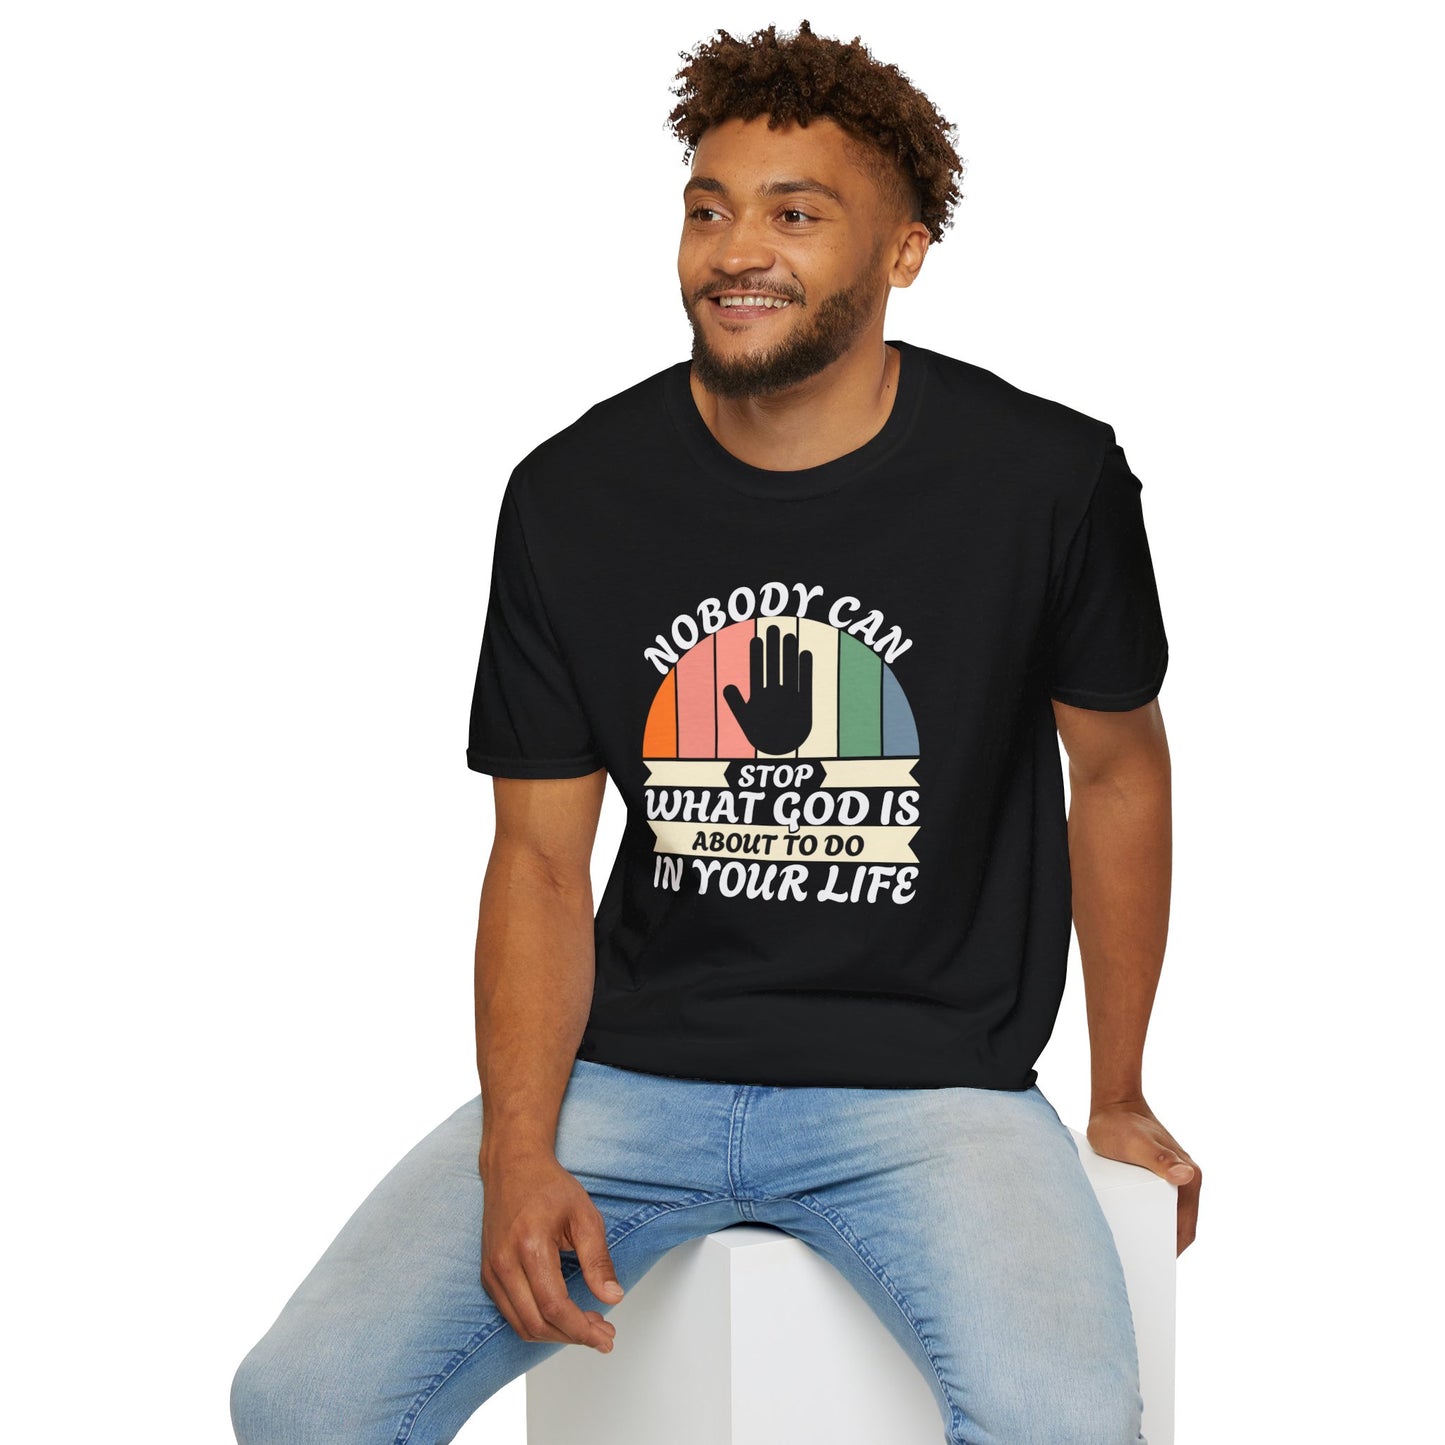 Nobody Can Stop What God Is About To Do In Your Life  Unisex Christian T-shirt